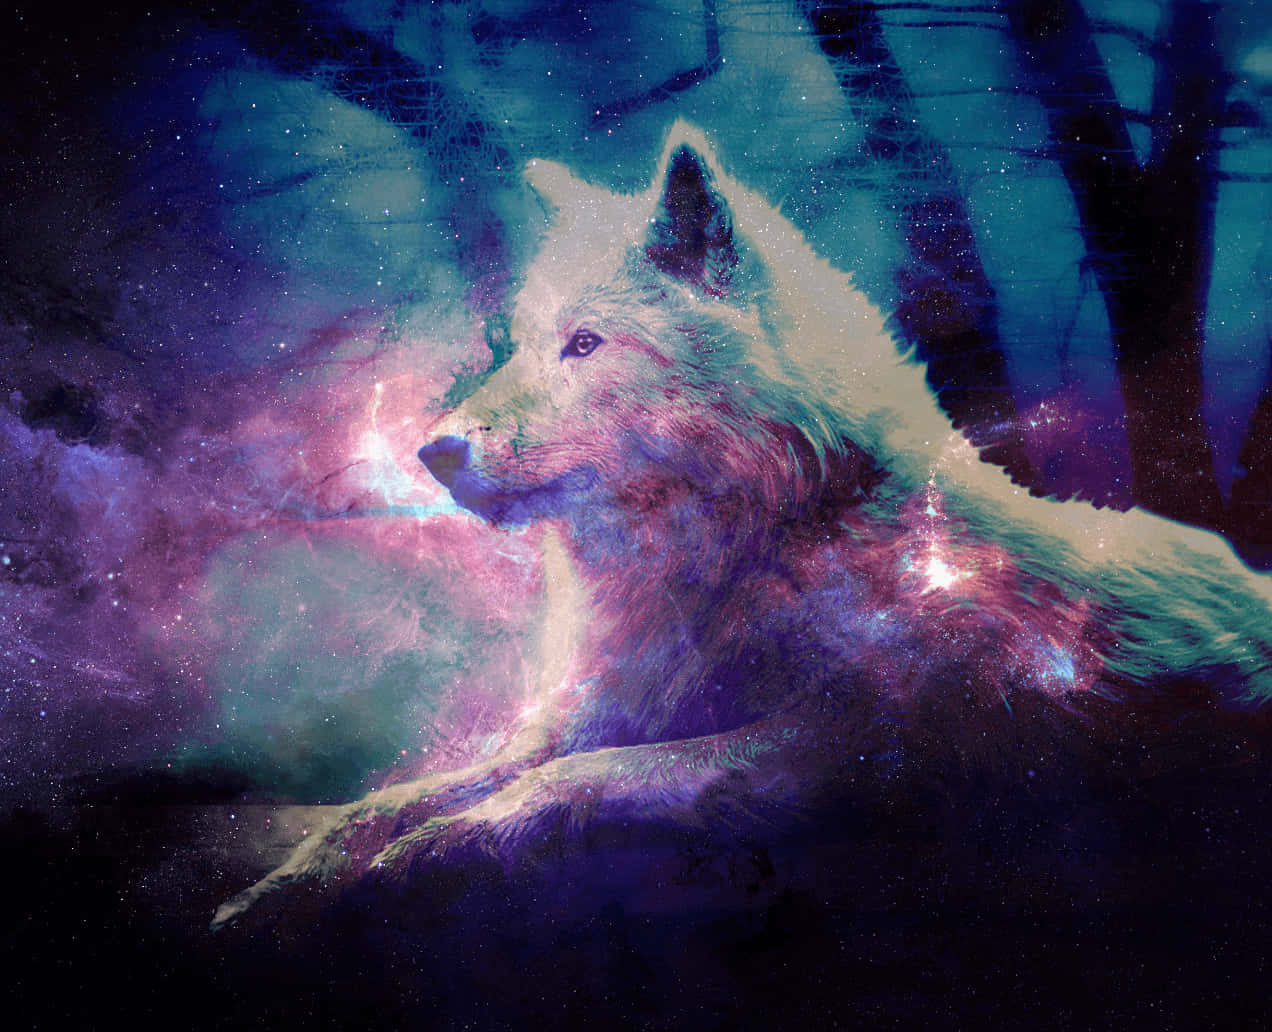 Look up at the wonders of the night sky with the mystical galaxy wolves Wallpaper